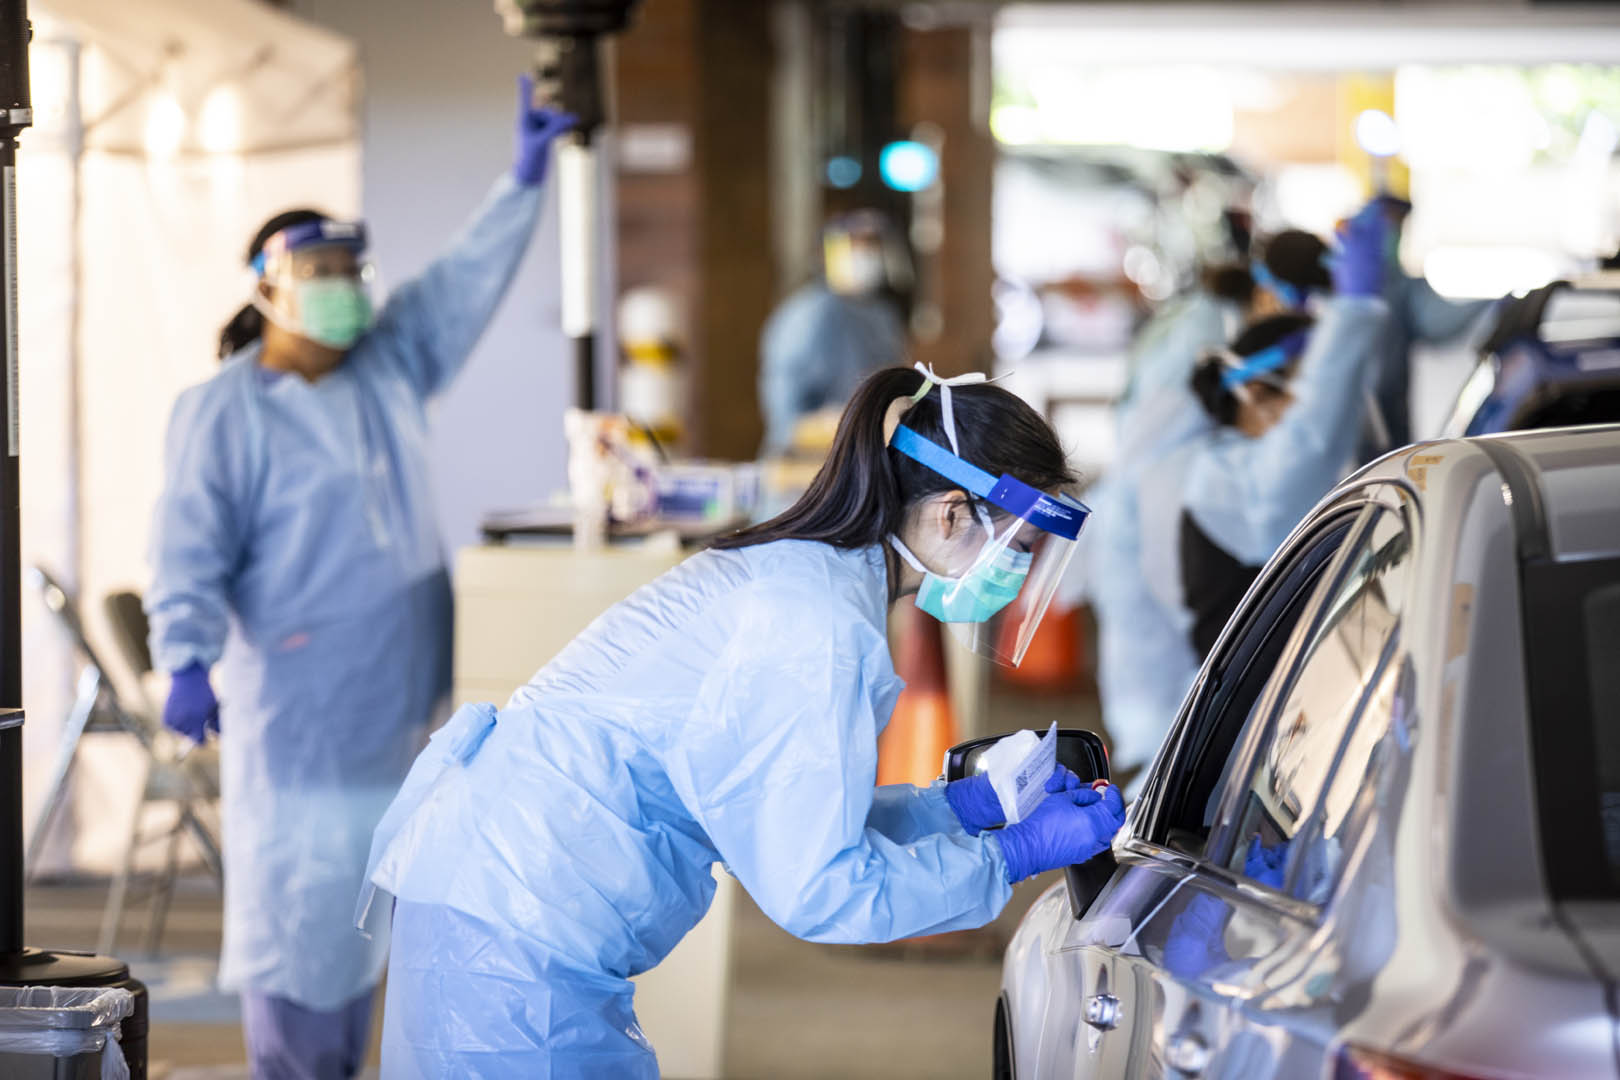 Nurses administering COVID tests at a drive-up testing facility. A nurse in the foreground is talking to a driver and a nurse in the background is raising her hand to let the next vehicle know they should move forward.